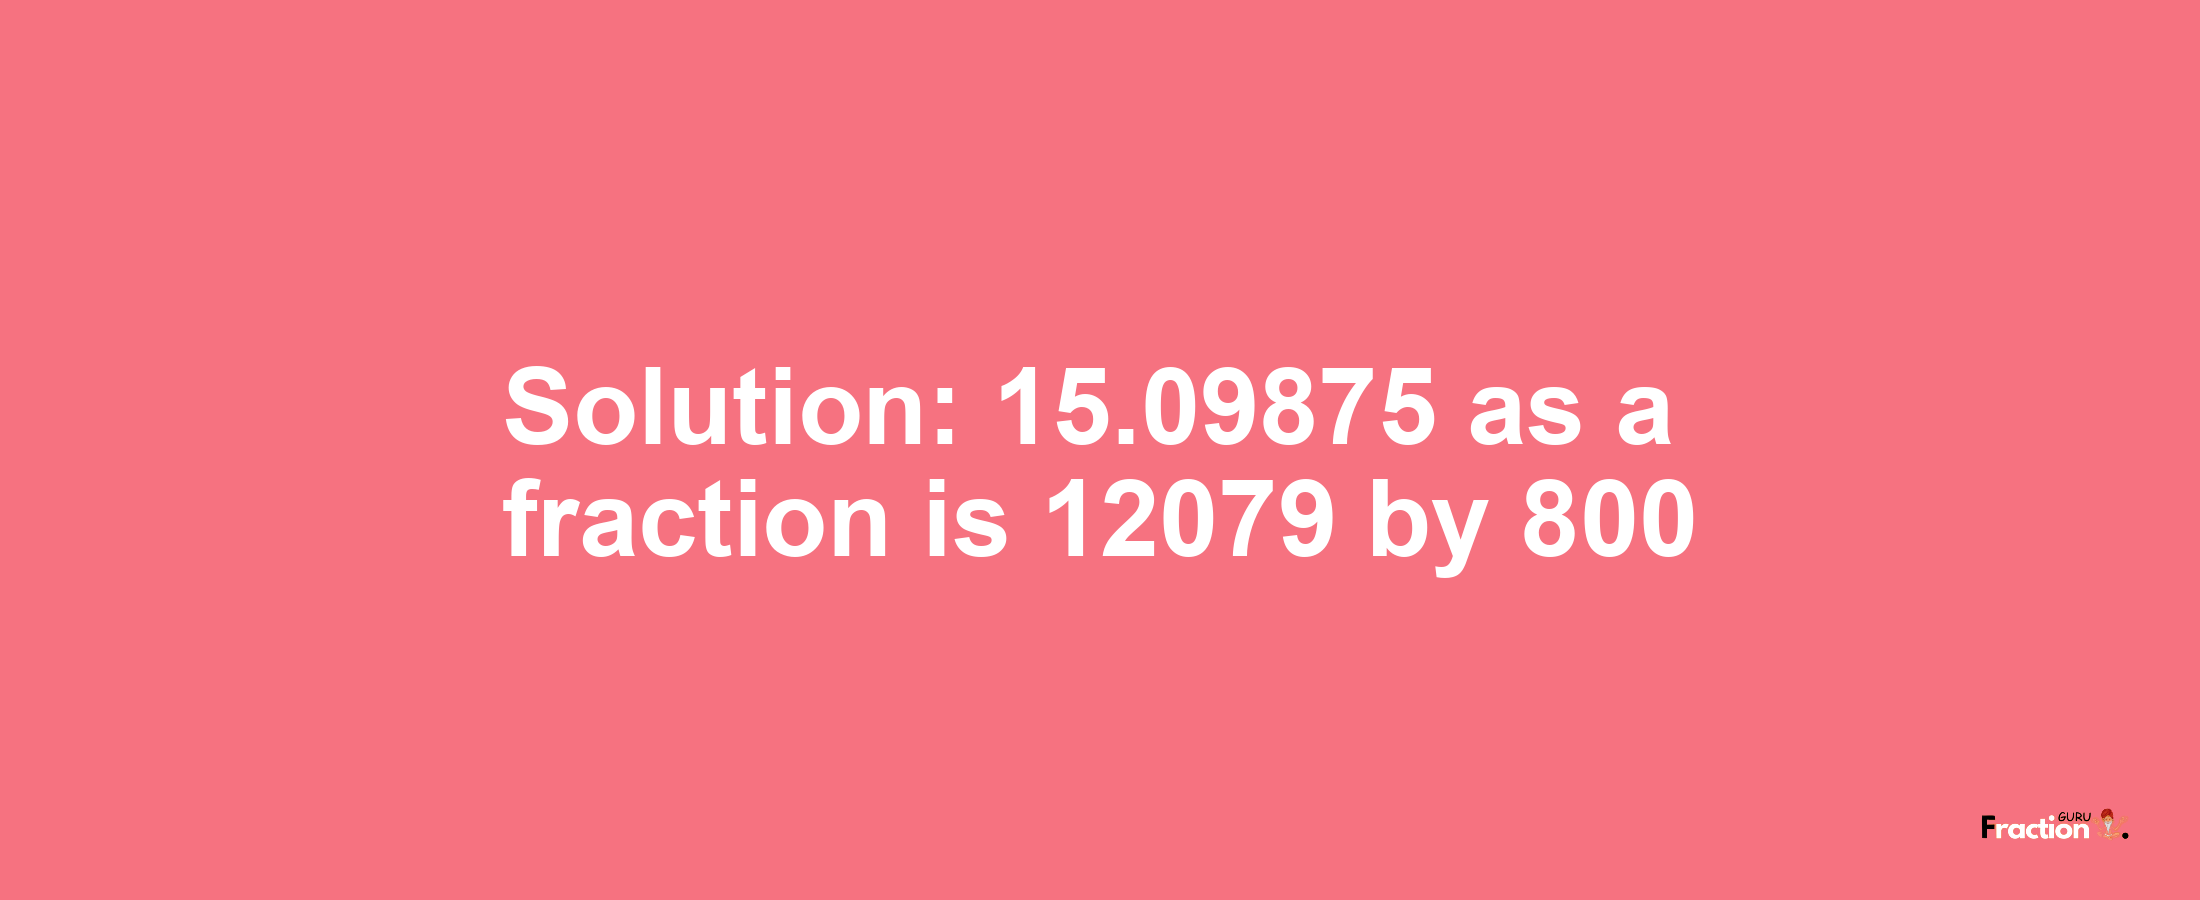 Solution:15.09875 as a fraction is 12079/800